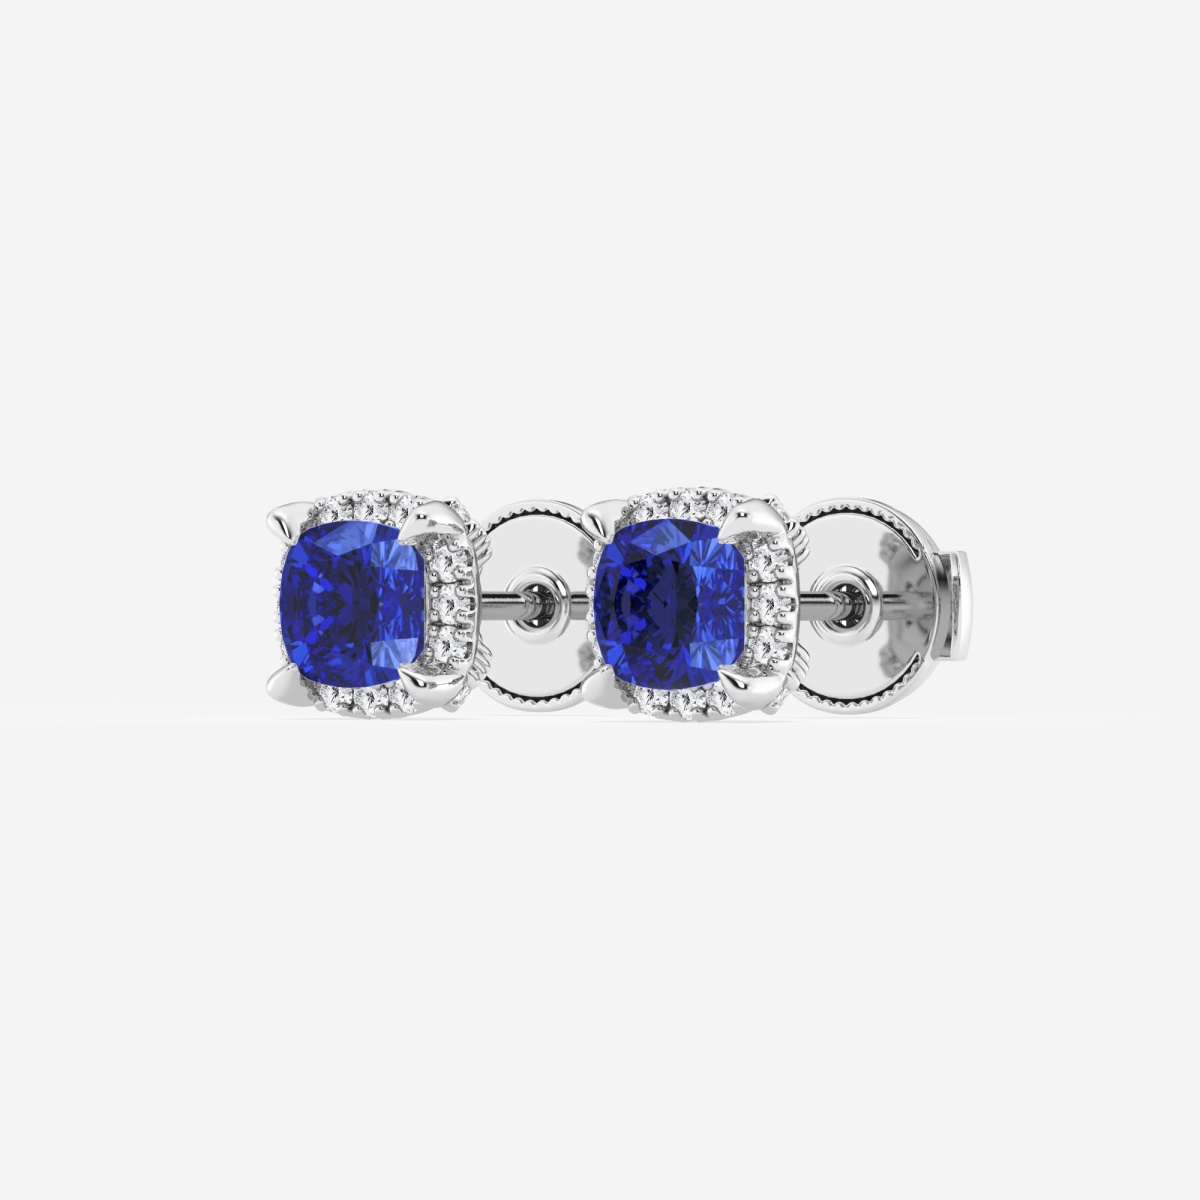 Additional Image 1 for  4.60X4.60 mm Cushion Cut Created Sapphire and 1/5 ctw Round Lab Grown Diamond Shadow Halo Stud Earrings